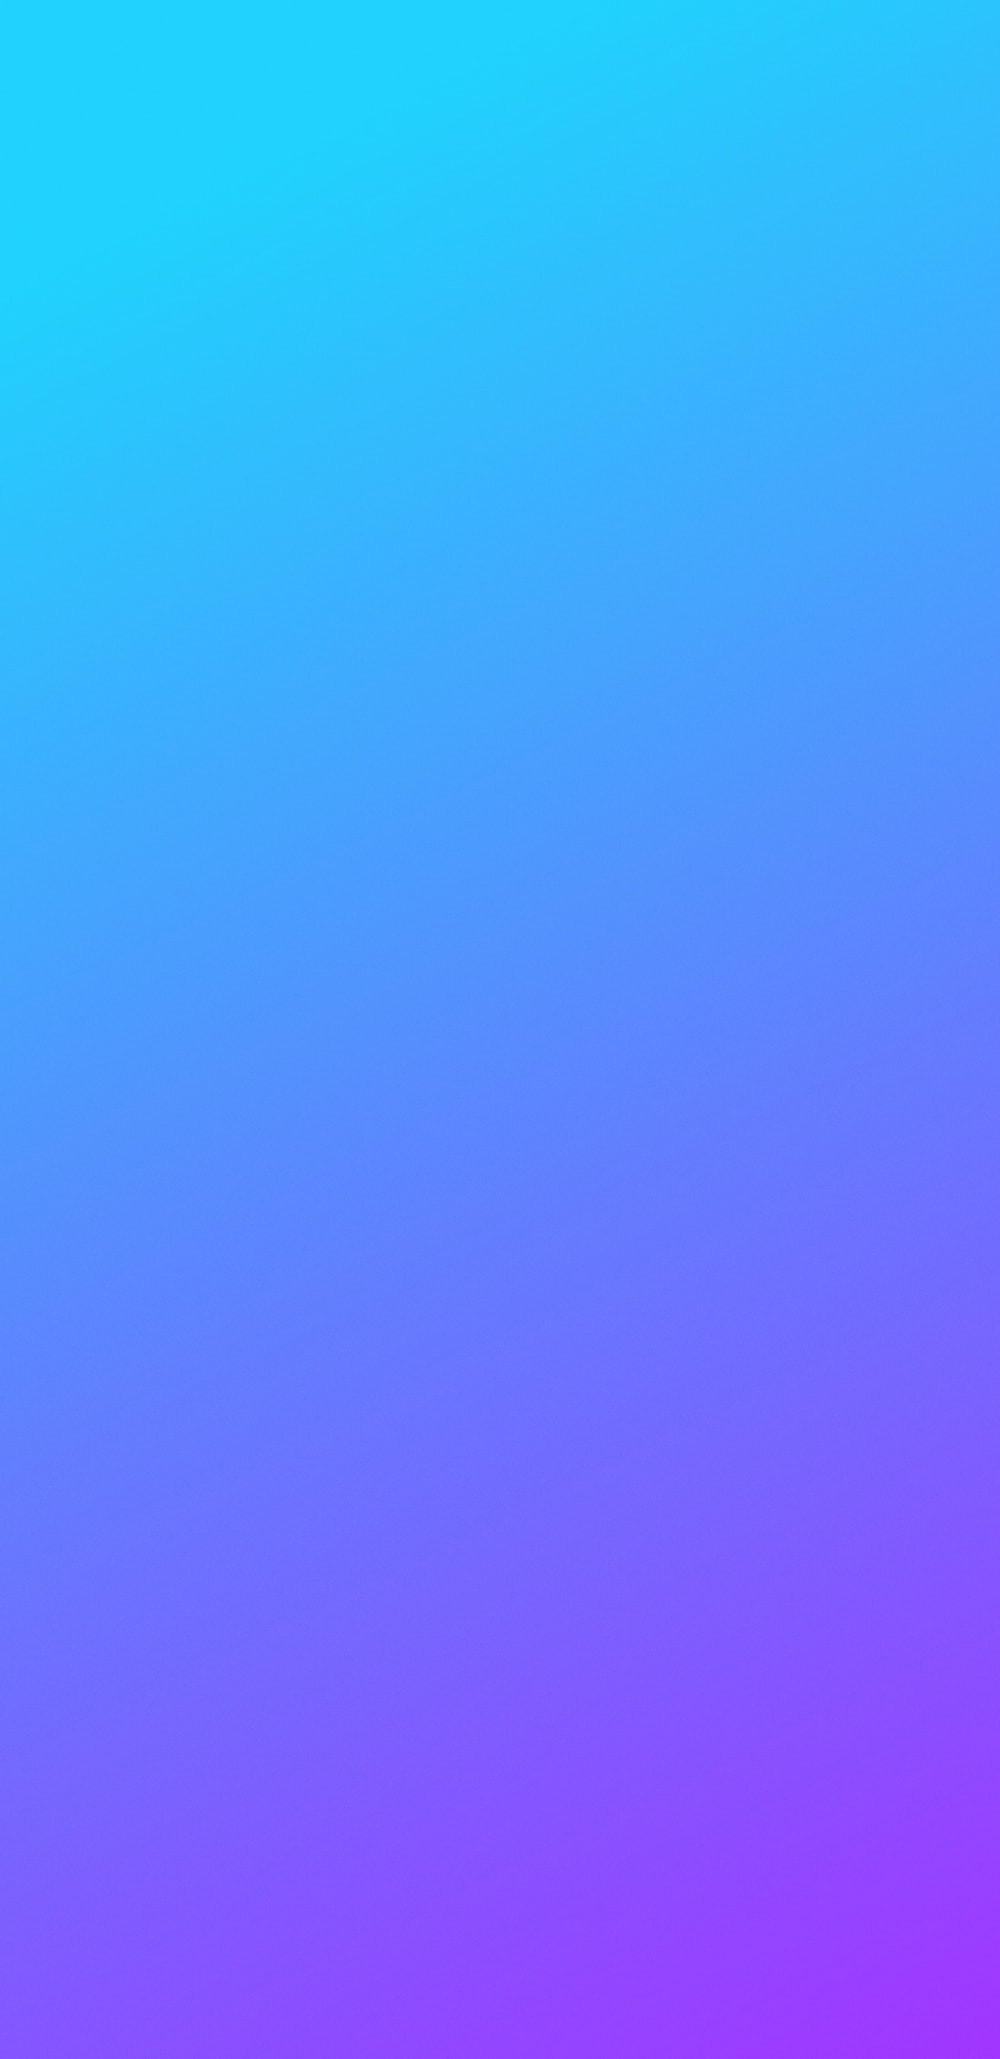 Gradient Blue Picture. Download Free Image